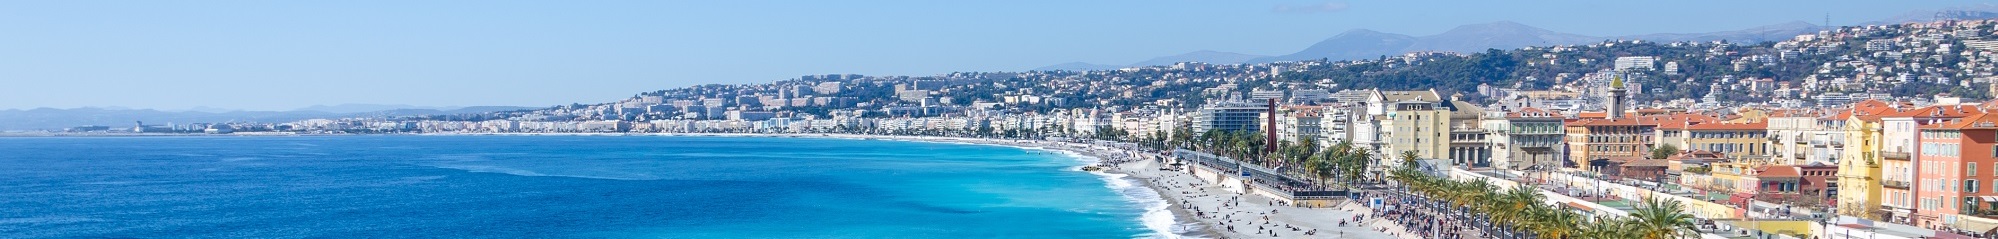 Baie des Anges, French Riviera